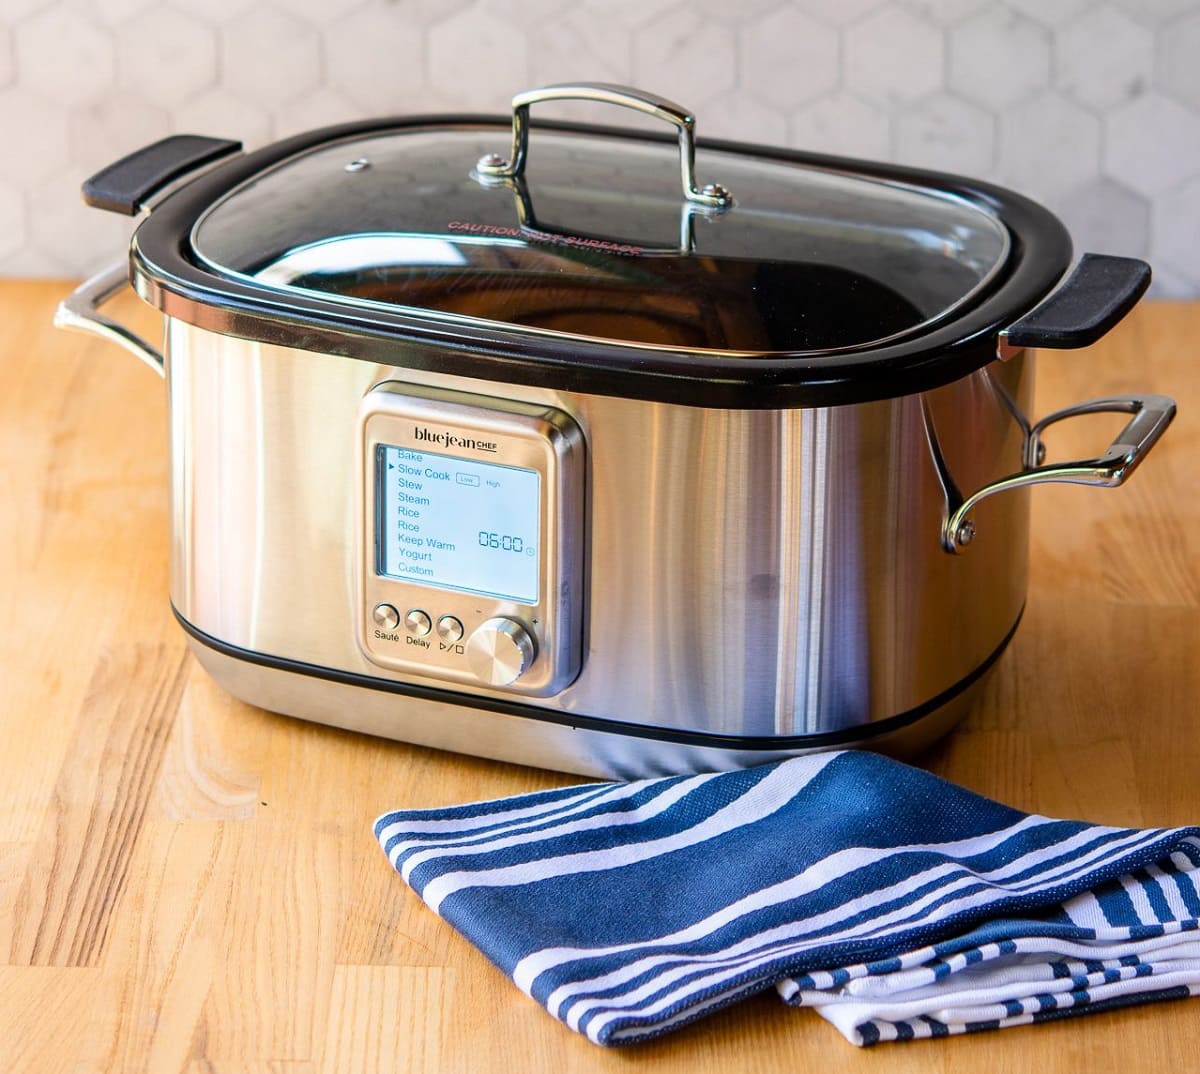 How To Convert Cooking Time From The Oven To The Slow Cooker